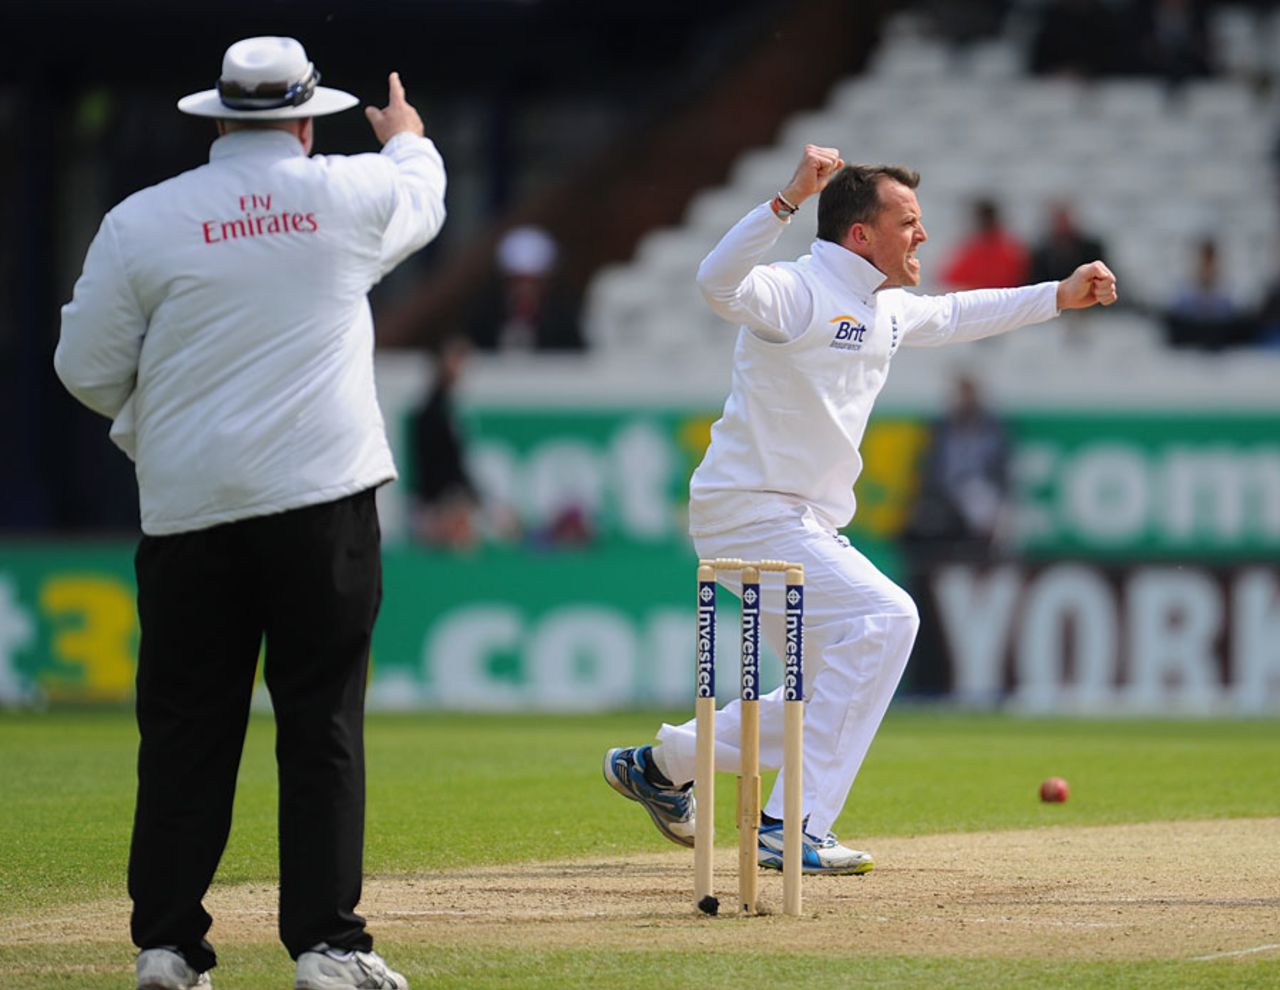 Steve Davis gives a decision in favour of Graeme Swann, England v New Zealand, 2nd Investec Test, Headingley, 4th day, May 27, 2013